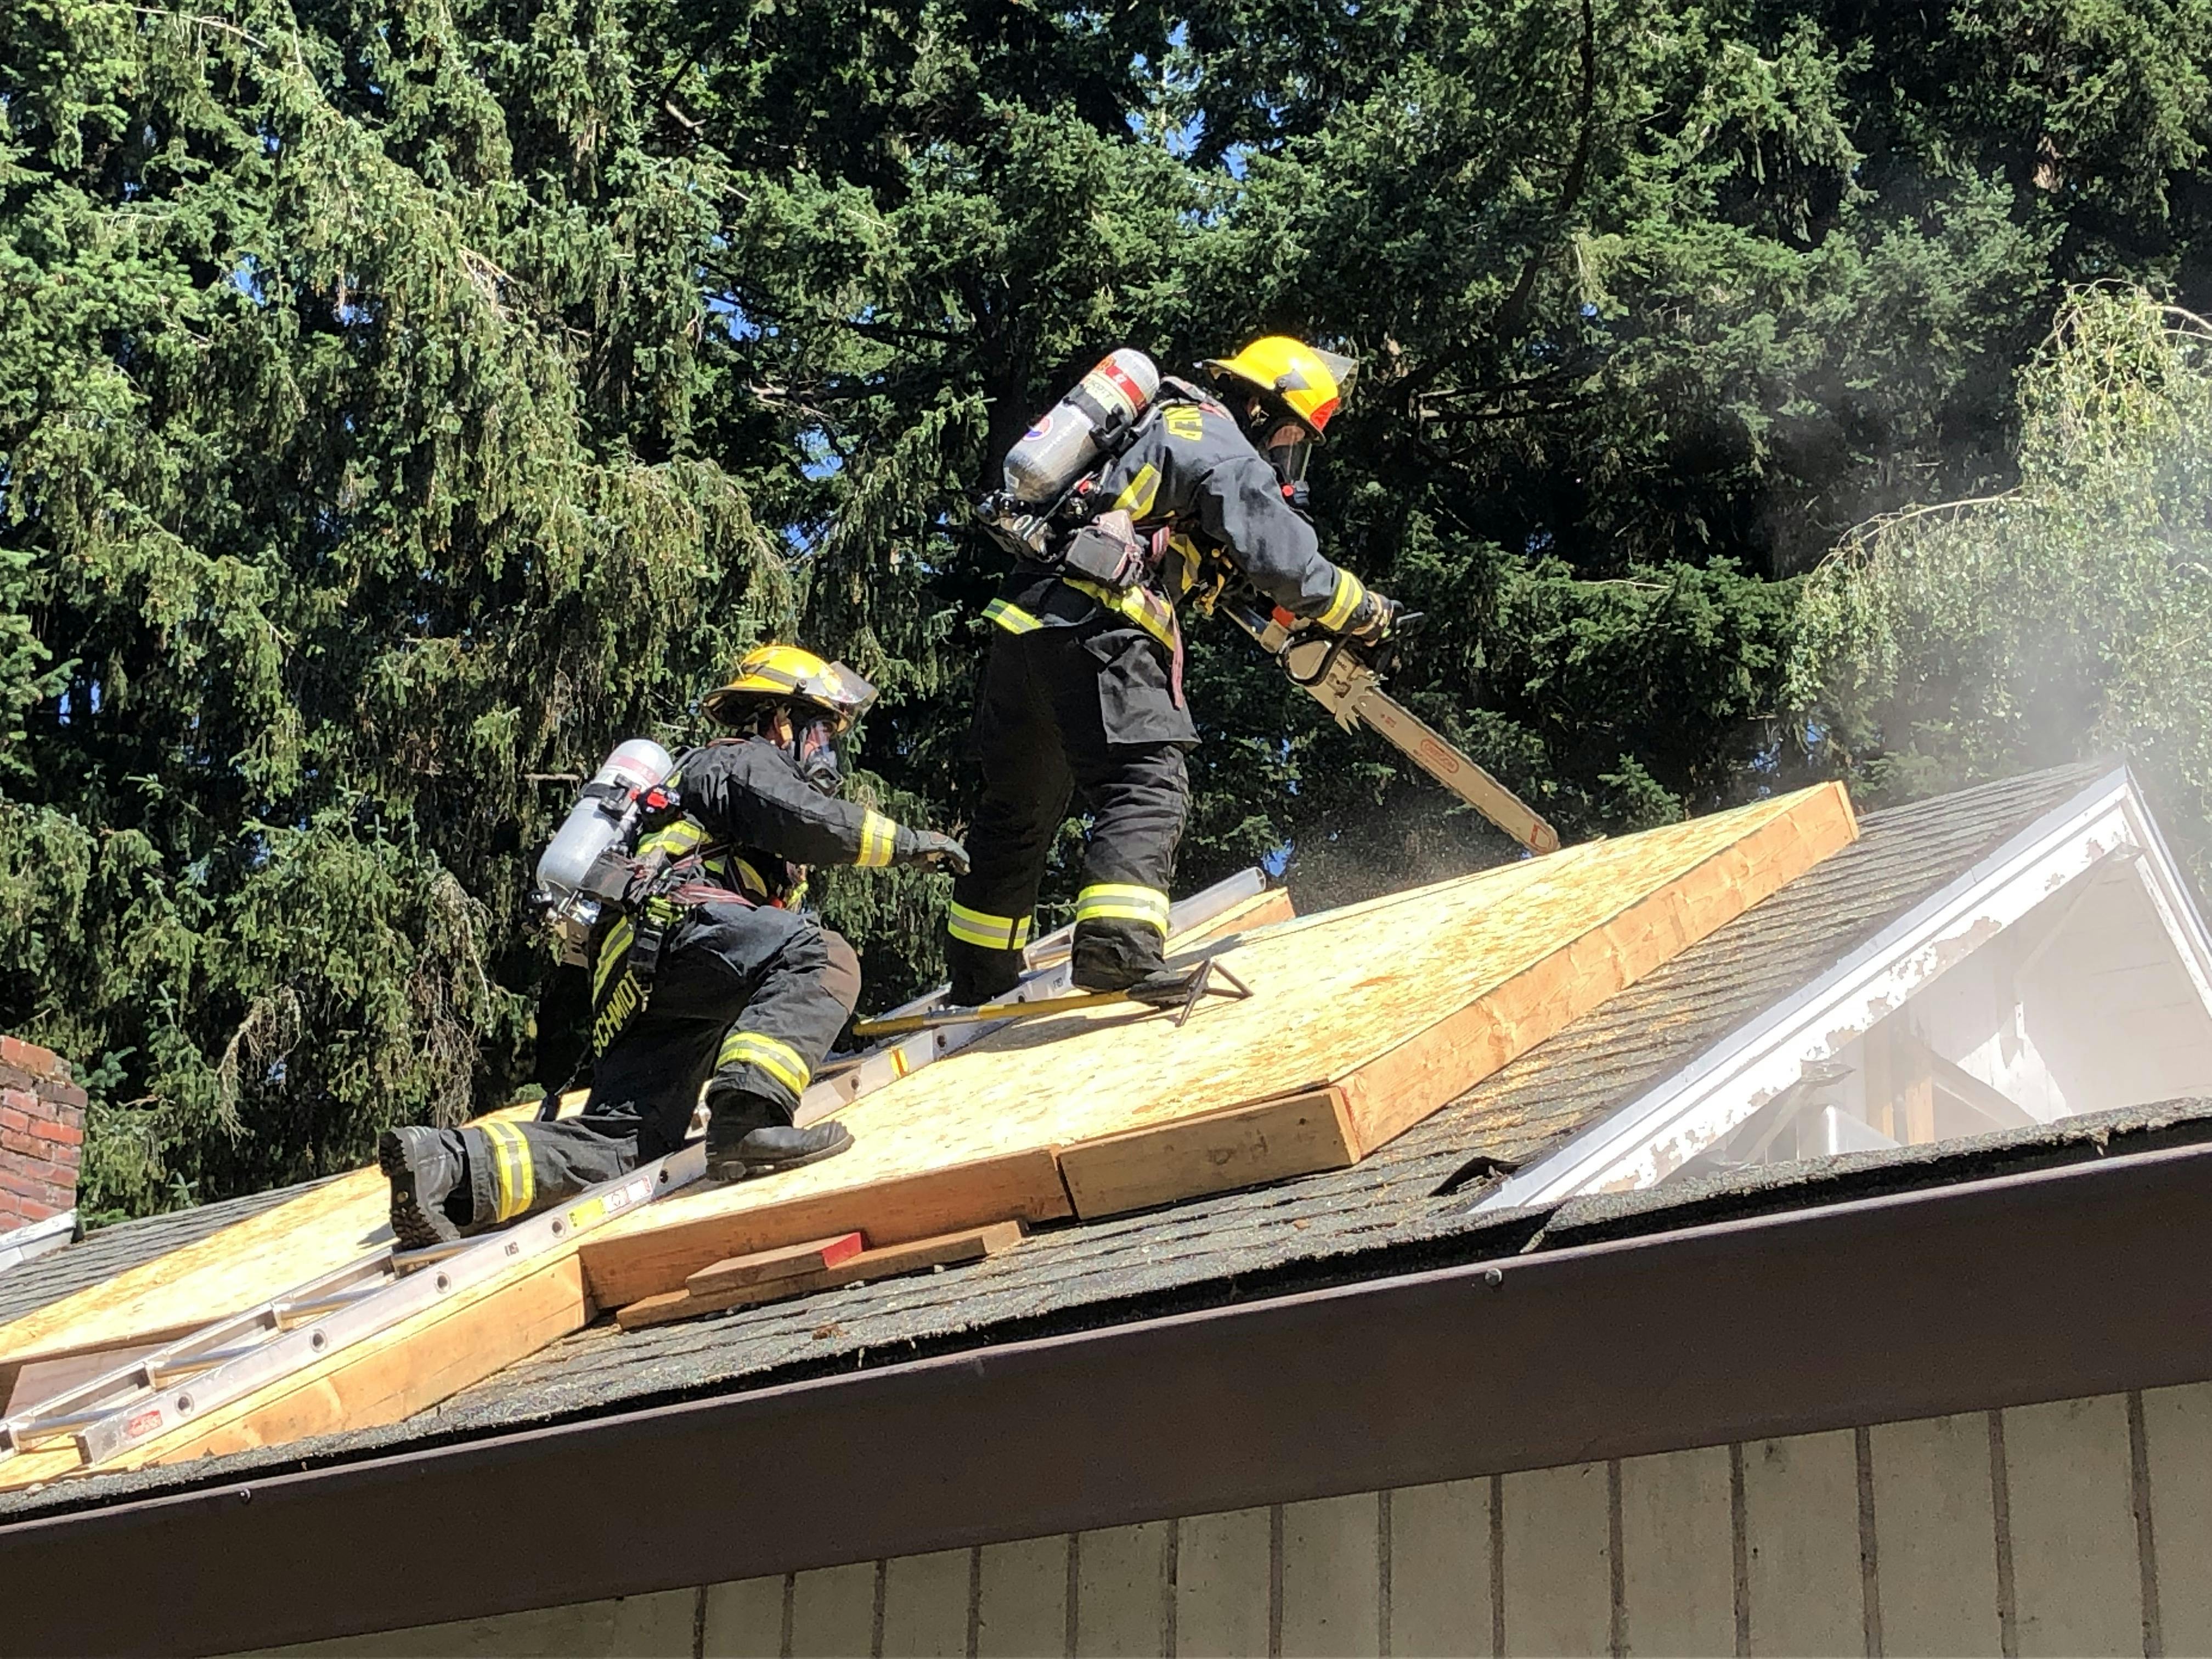 Firefighters were able to use the abandoned house to practice lifesaving skills